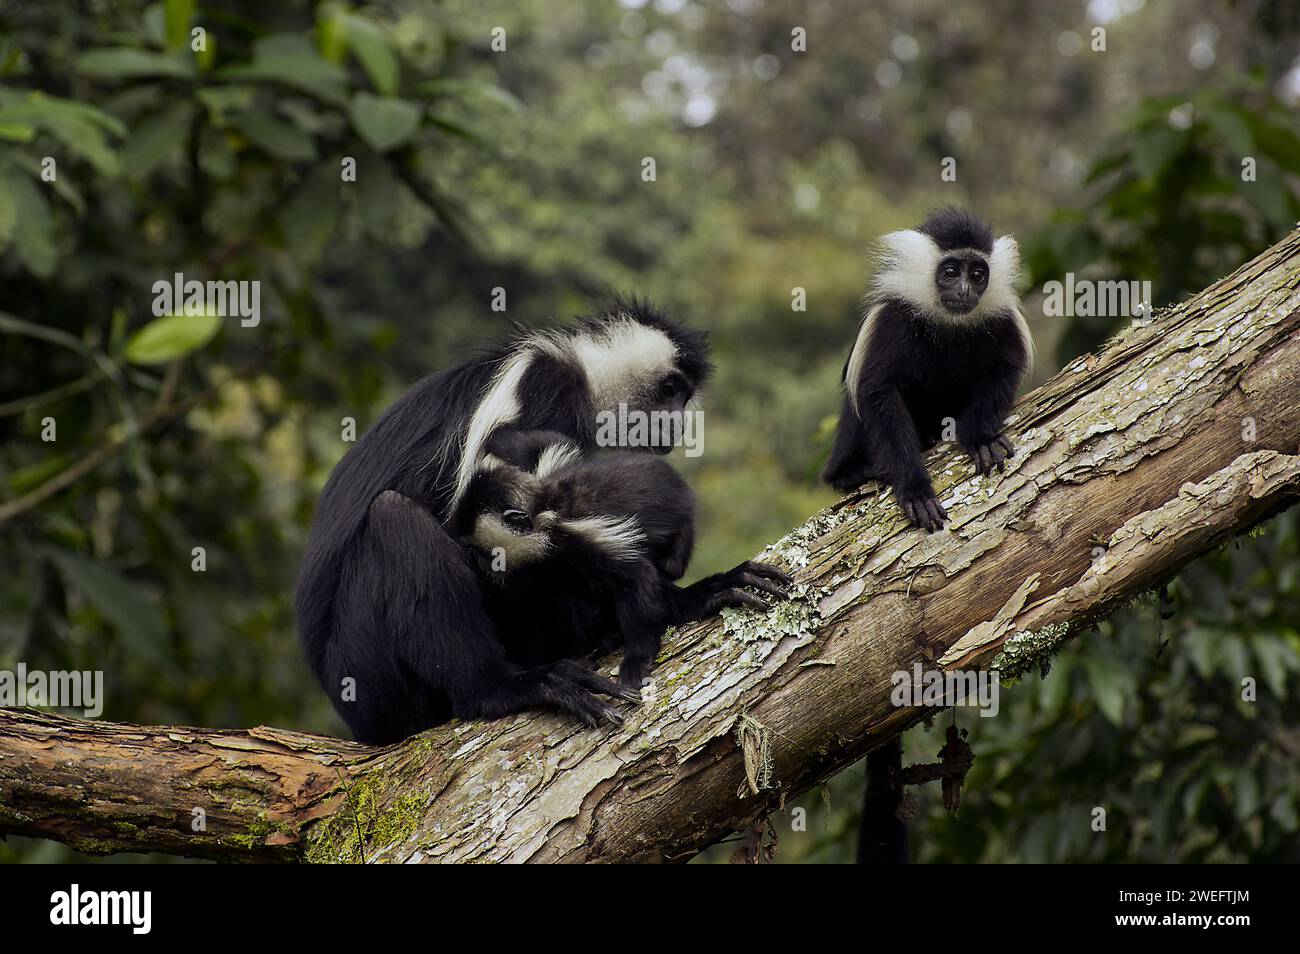 Wild colobus monkeys with their characteristic black and white fur in Nyungwe National Park in Rwanda, Central Africa Parks, at play or eating leaves Stock Photo